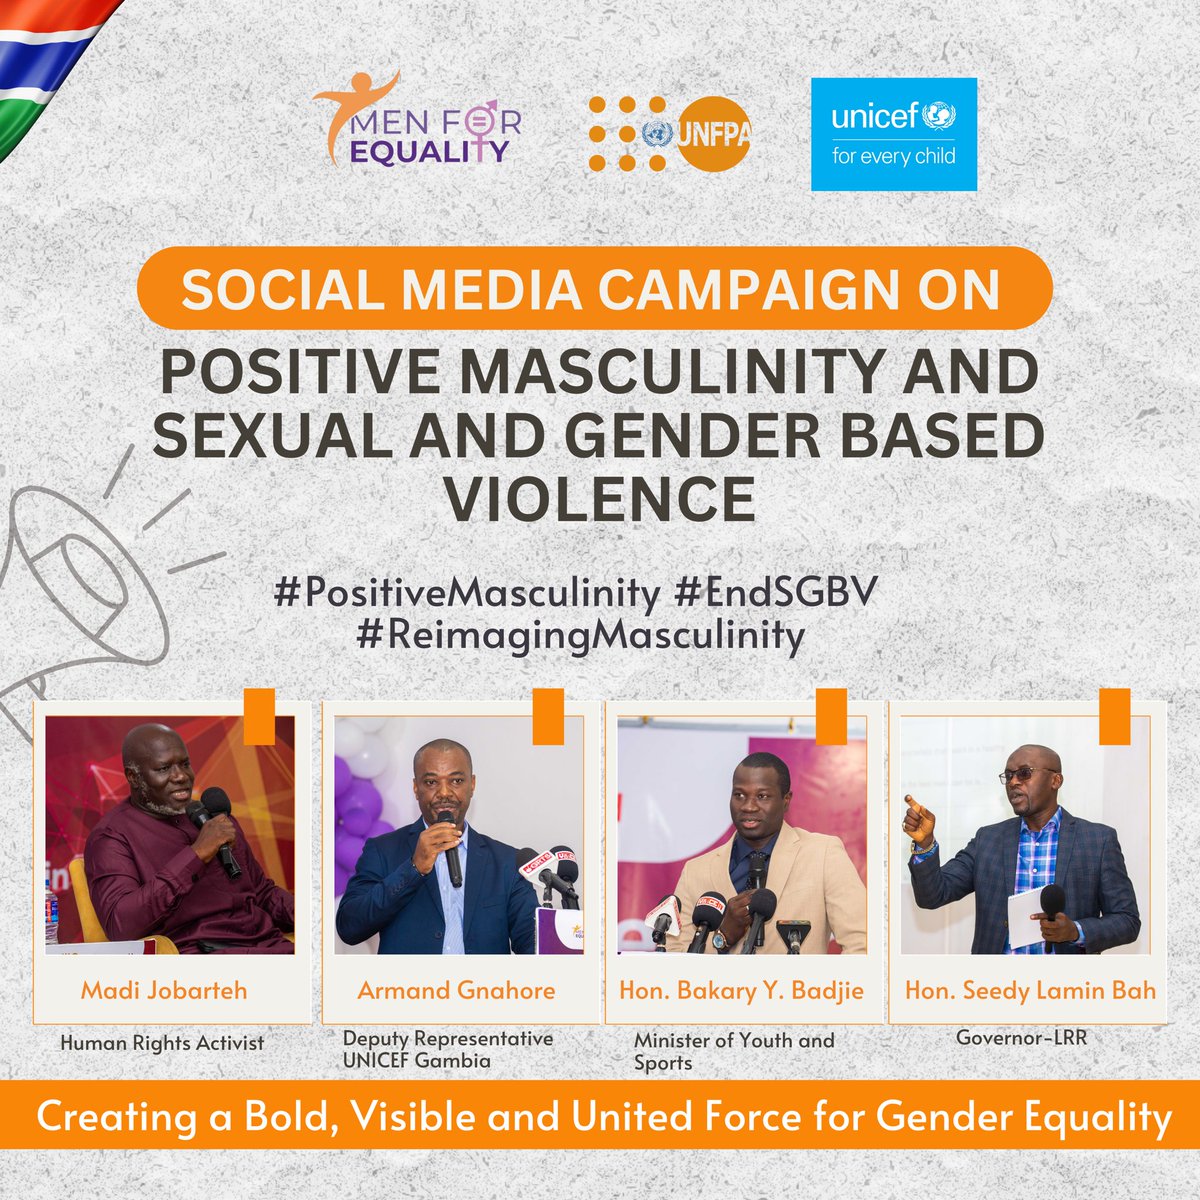 #Men4Equality is gearing up for a thrilling Social Media Campaign on Positive Masculinty and #SGBV. 
Join us as we amplify the voices of influential men across the country in a bid to create a Bold, Visible, and United Force for Gender Equality.

#PositiveMasculinity #EndSGBV